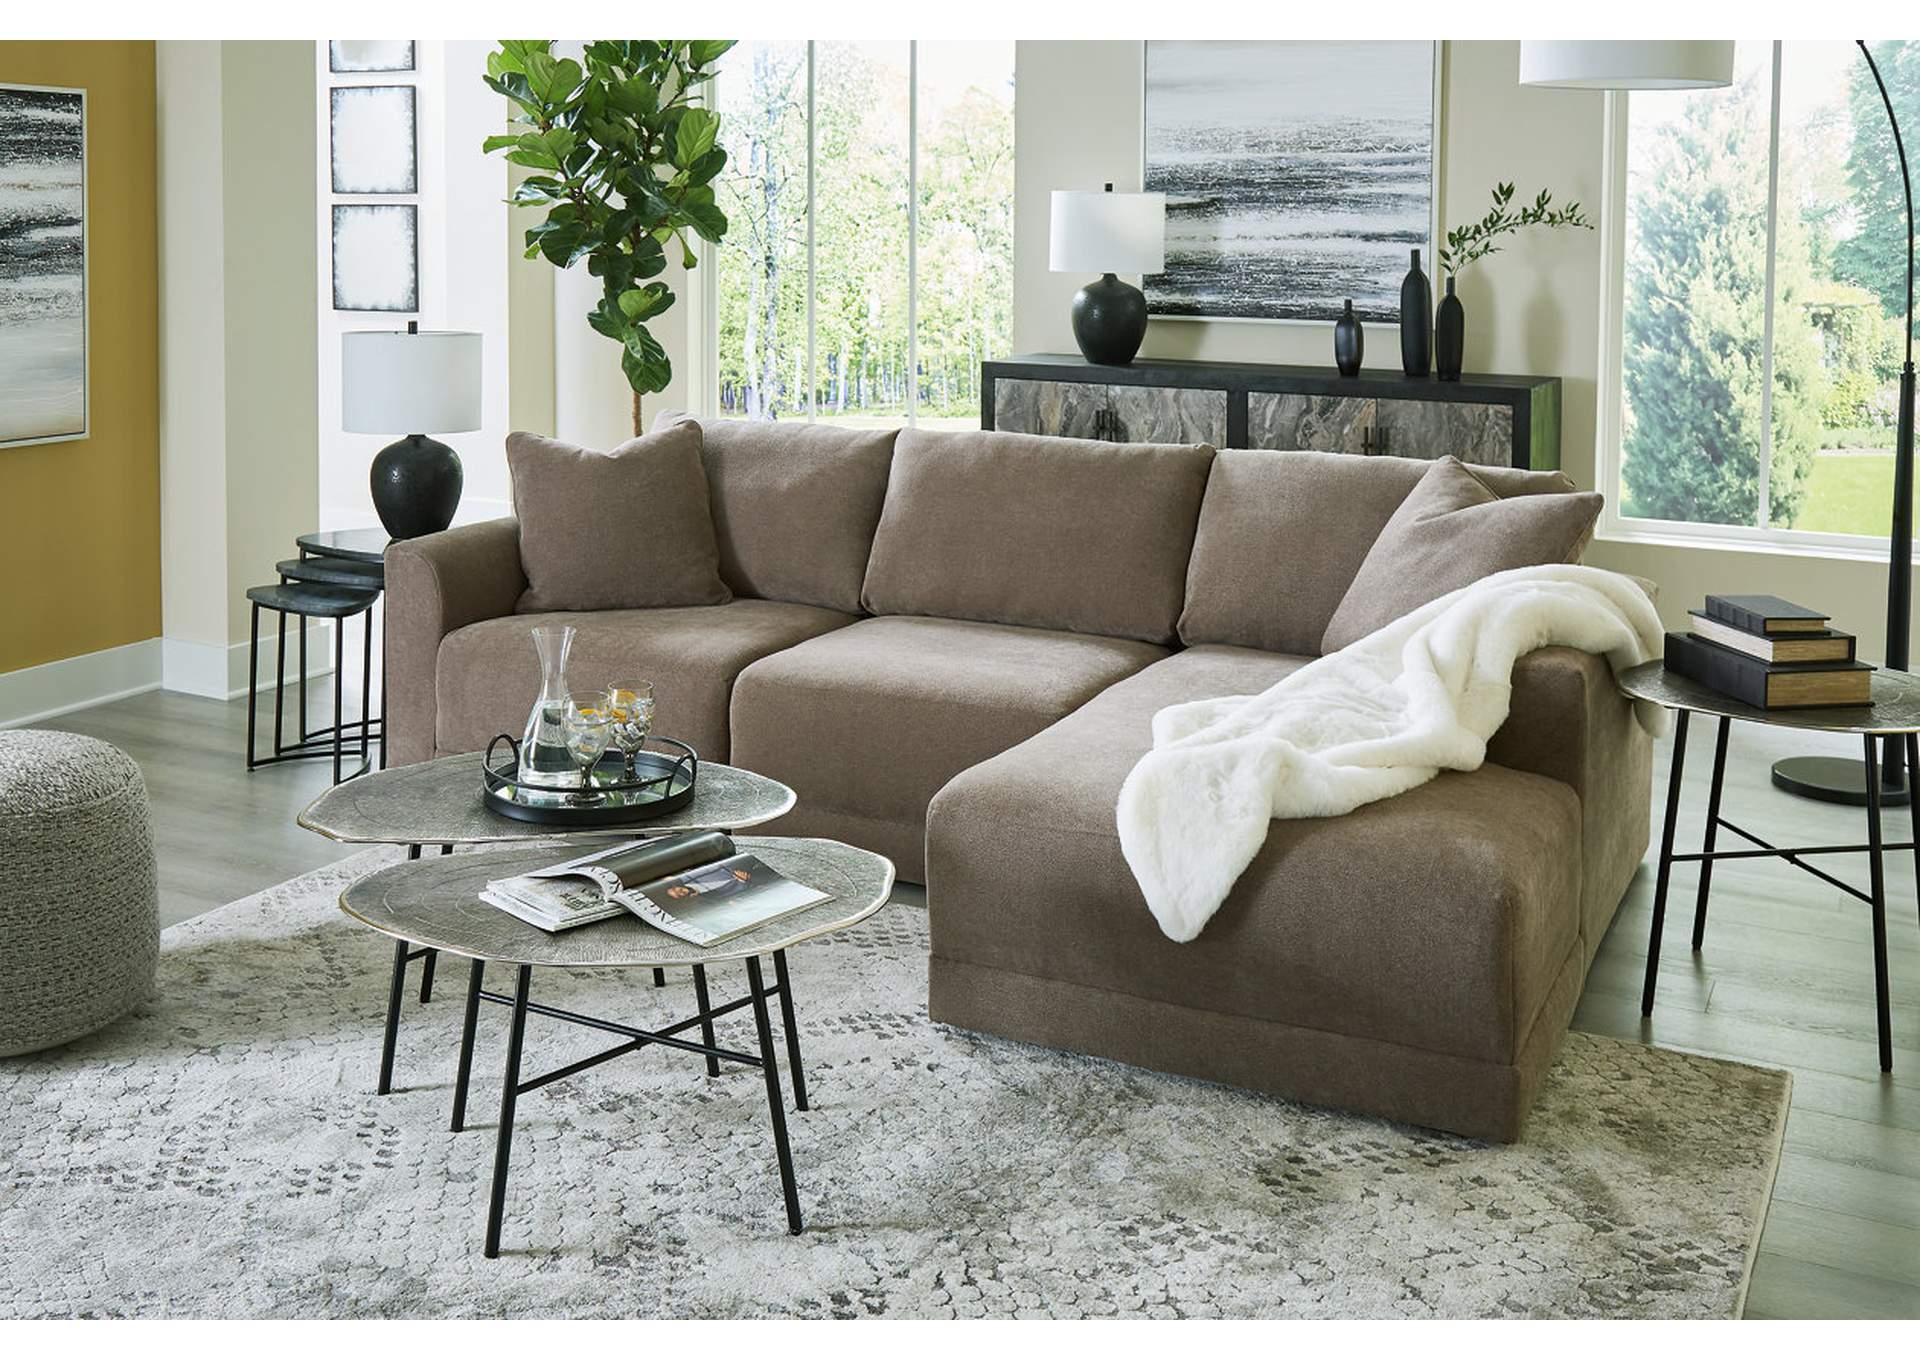 Raeanna 3-Piece Sectional Sofa with Chaise,Benchcraft